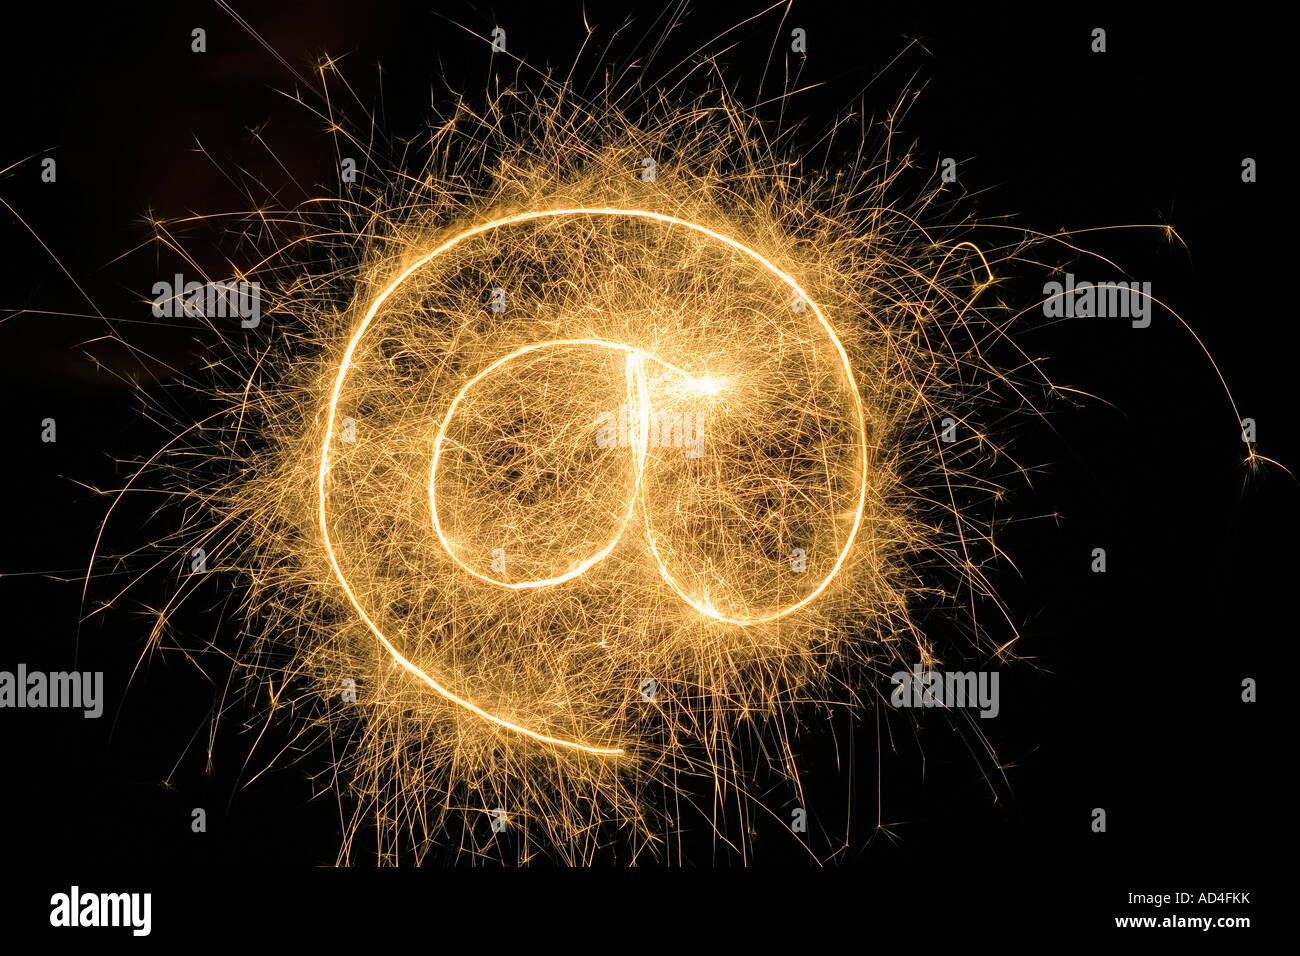 At' Symbol drawn with a sparkler Stock Photo